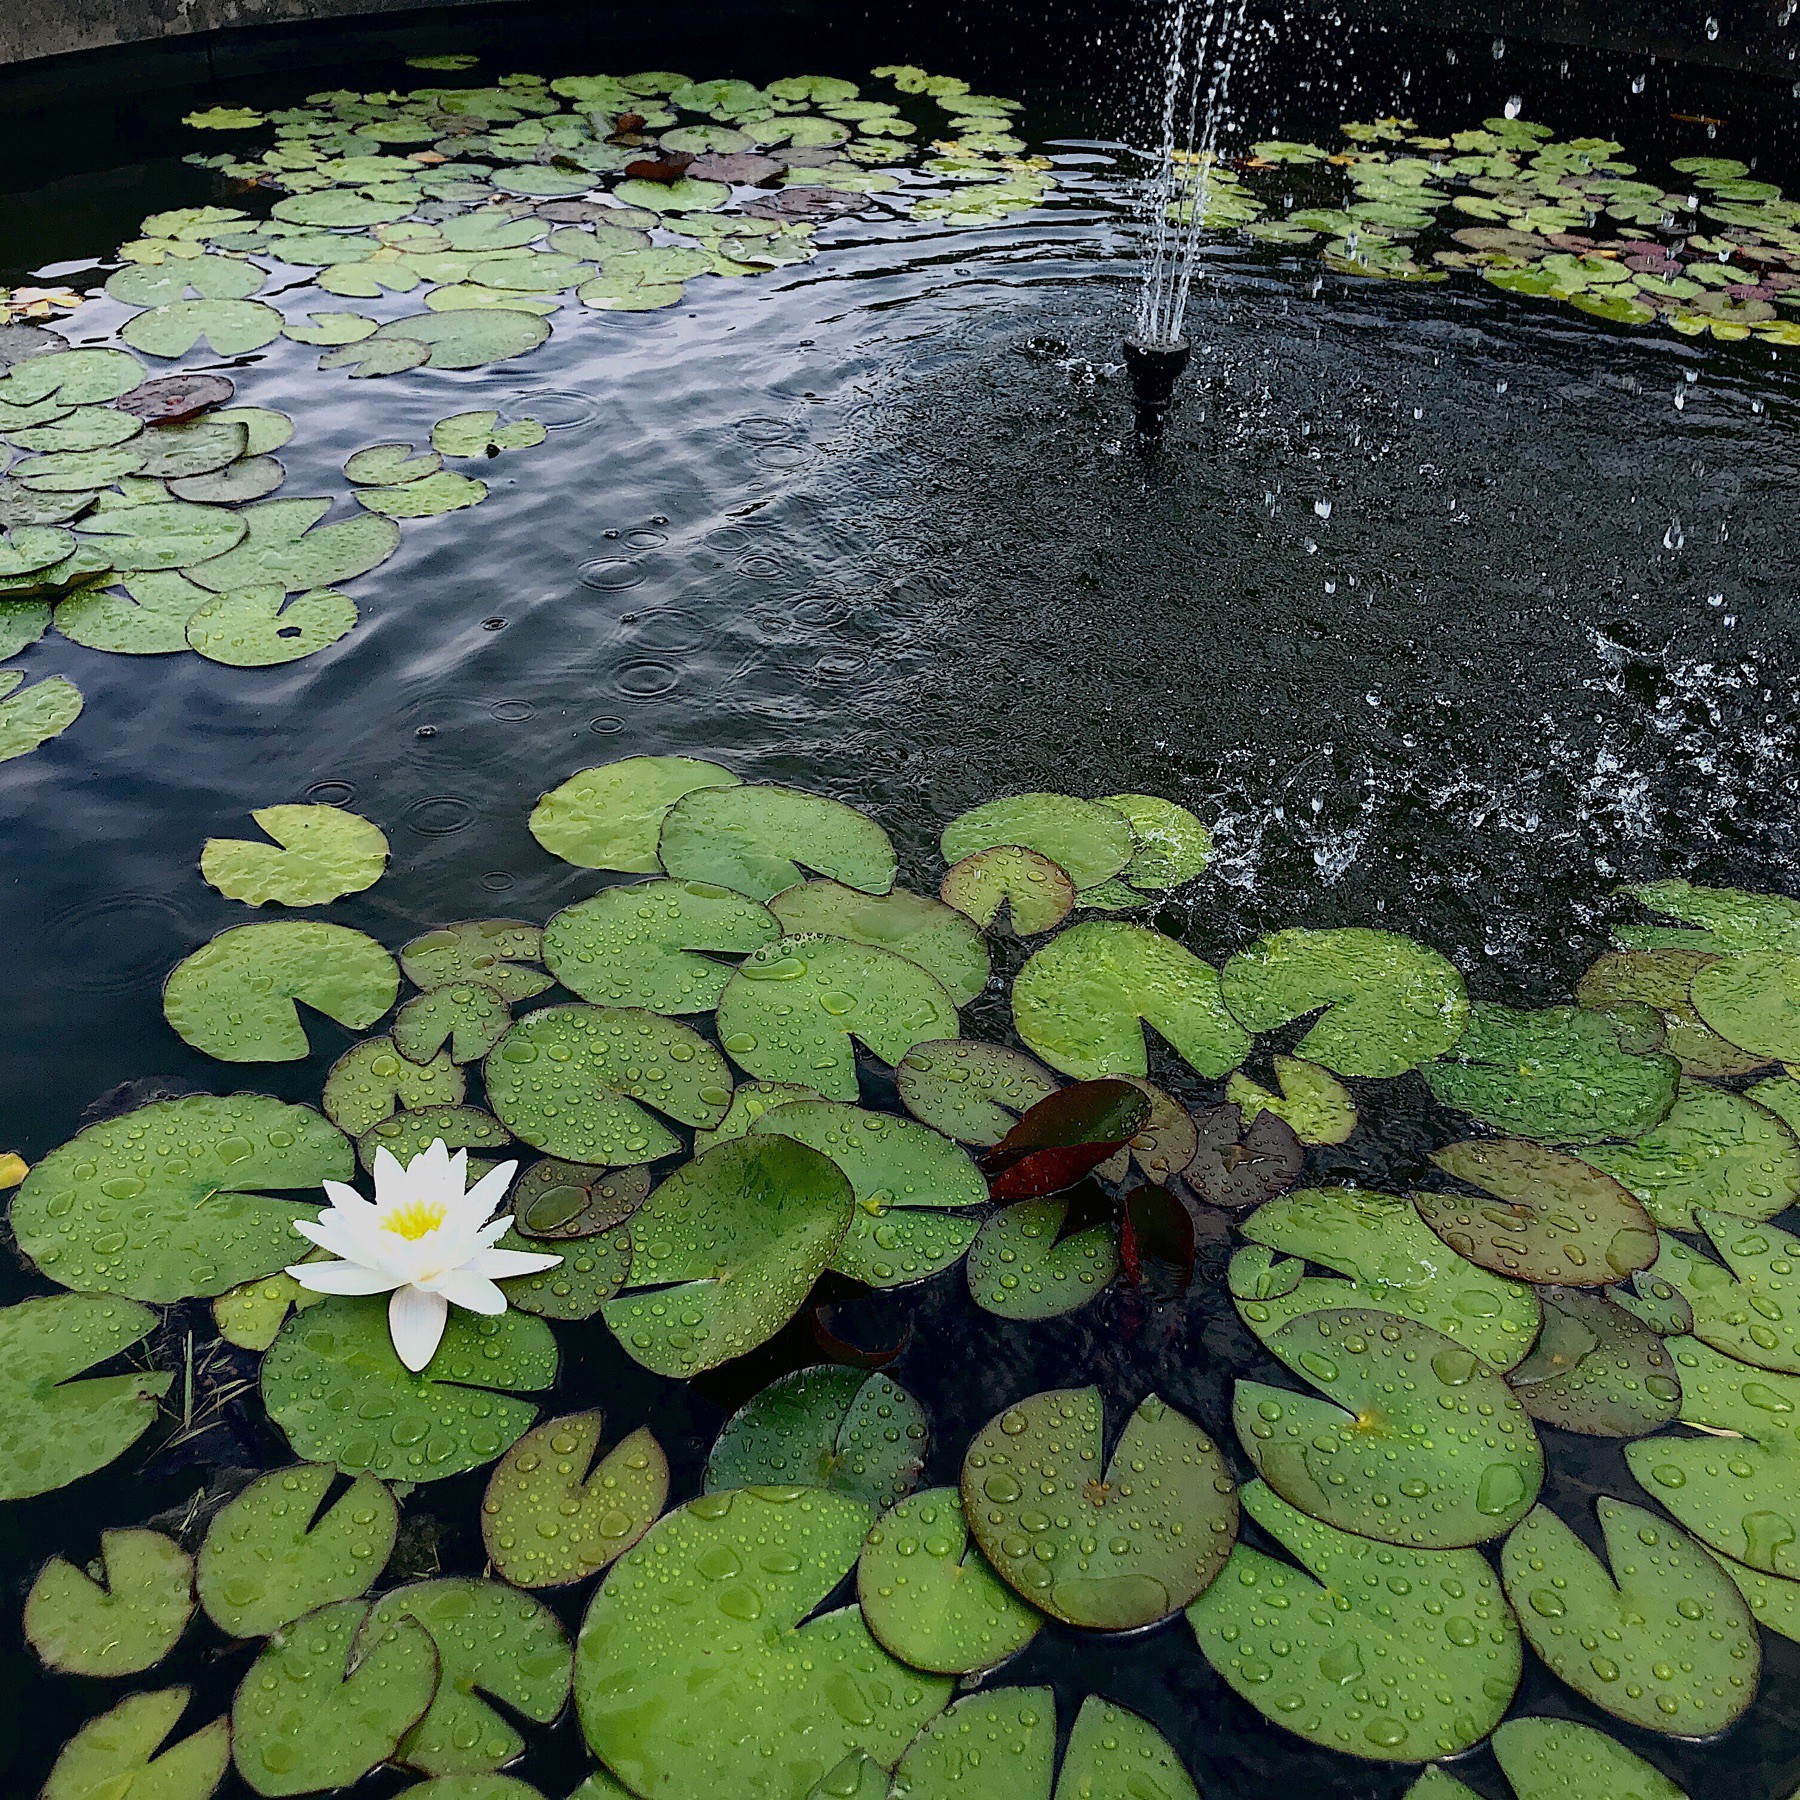 Lotus flowers and lily pads in water in fountain.